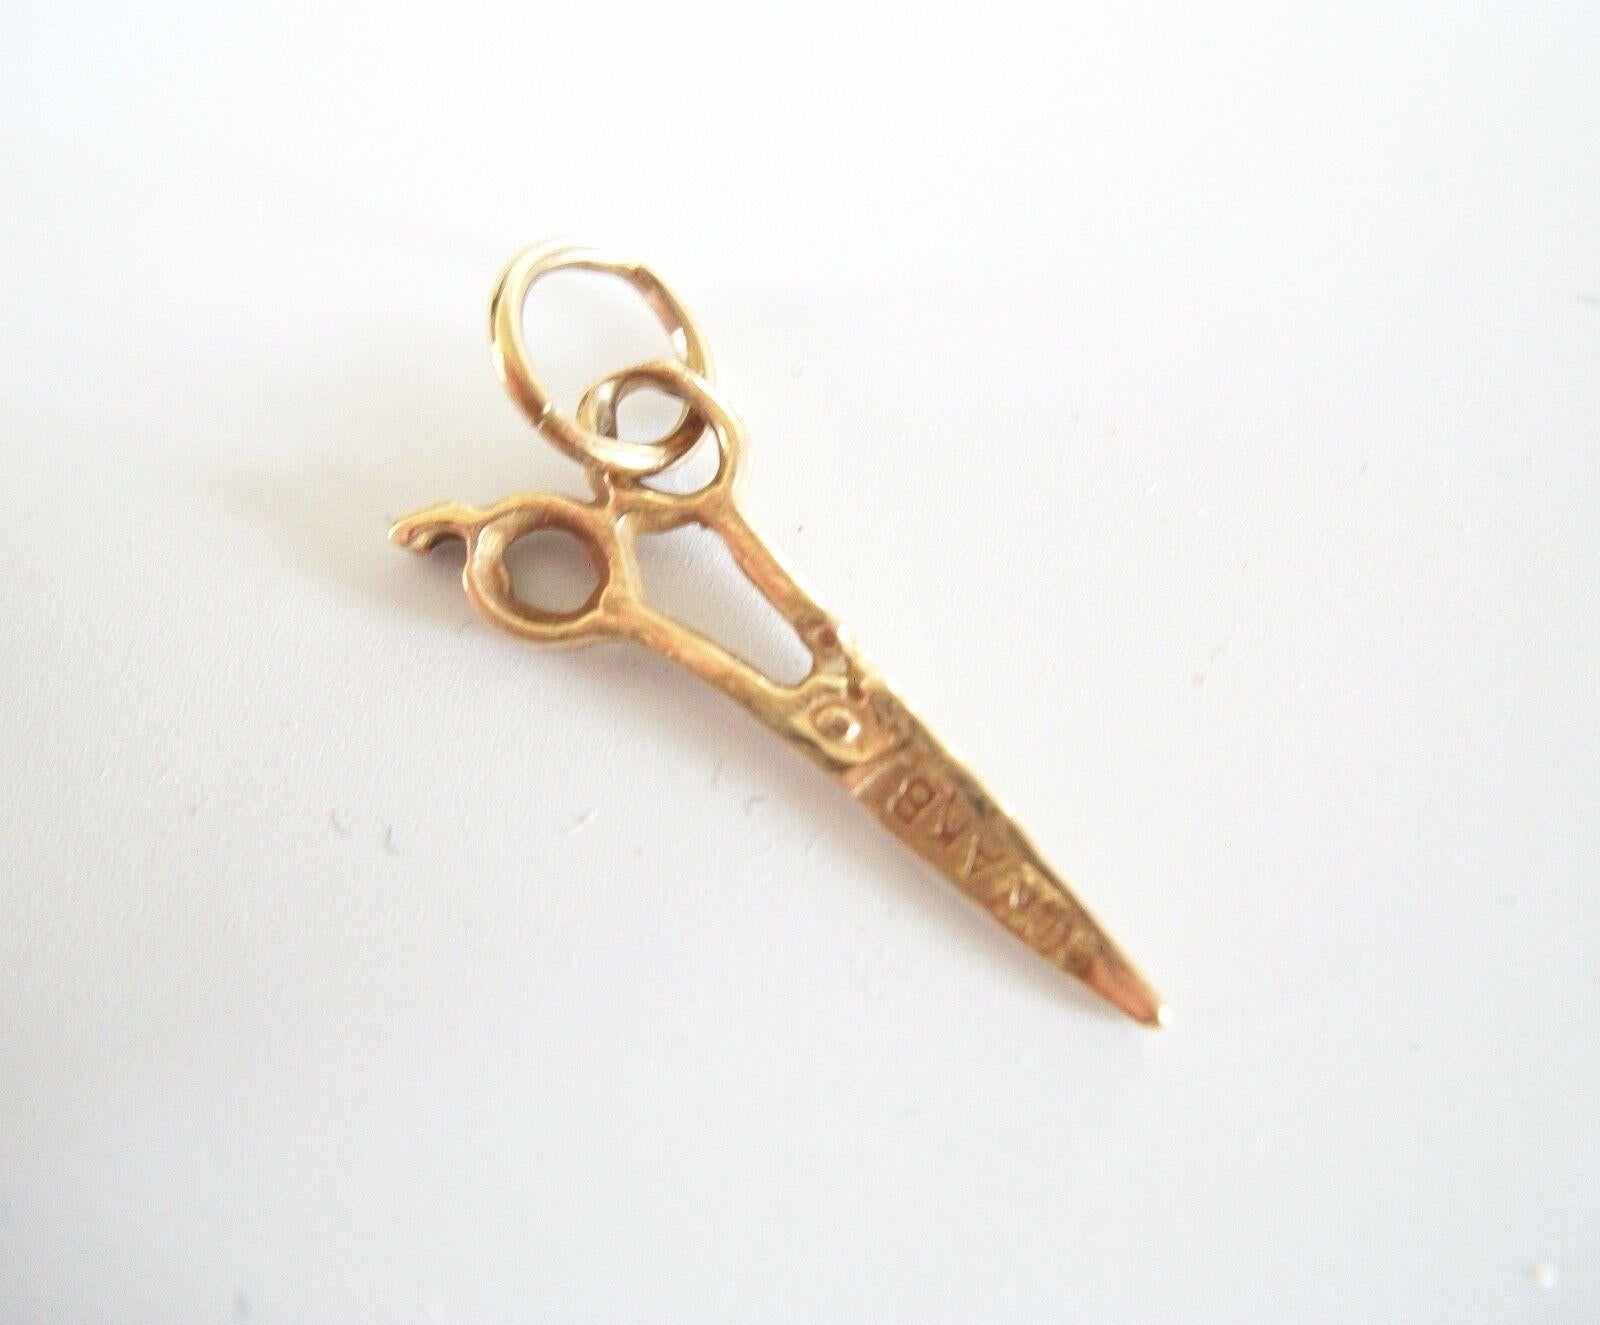 10K Yellow Gold Scissors Charm/Pendant - Signed - Canada - Late 20th Century In Good Condition For Sale In Chatham, CA